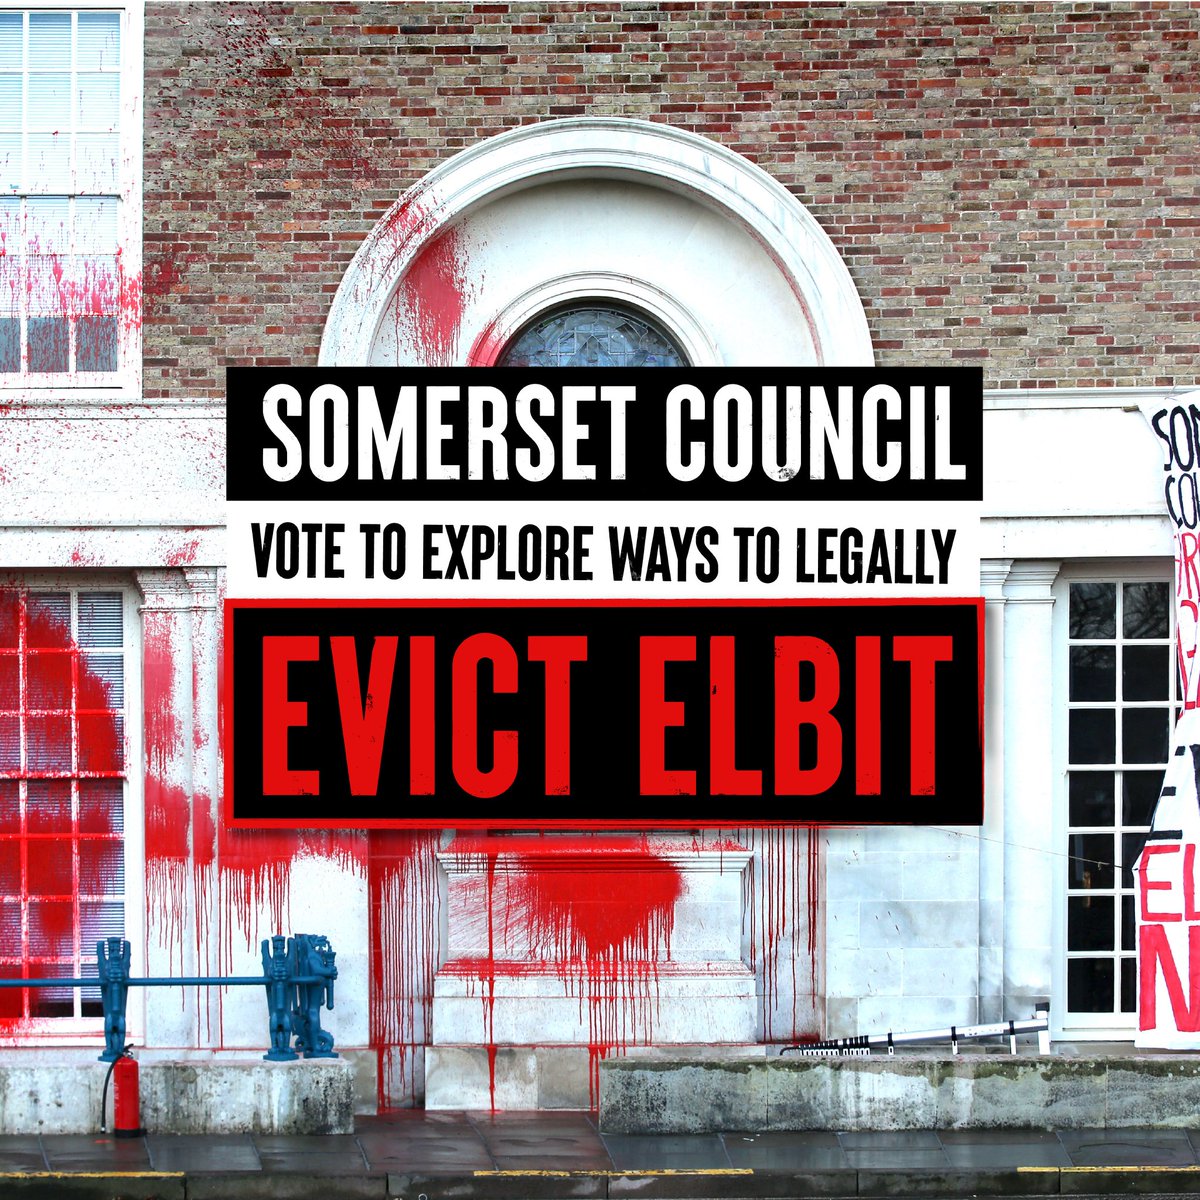 BREAKING: Somerset Council vote to explore ways to legally evict Elbit Systems, Israel's largest weapons firm, from their Bristol property! #EvictElbit